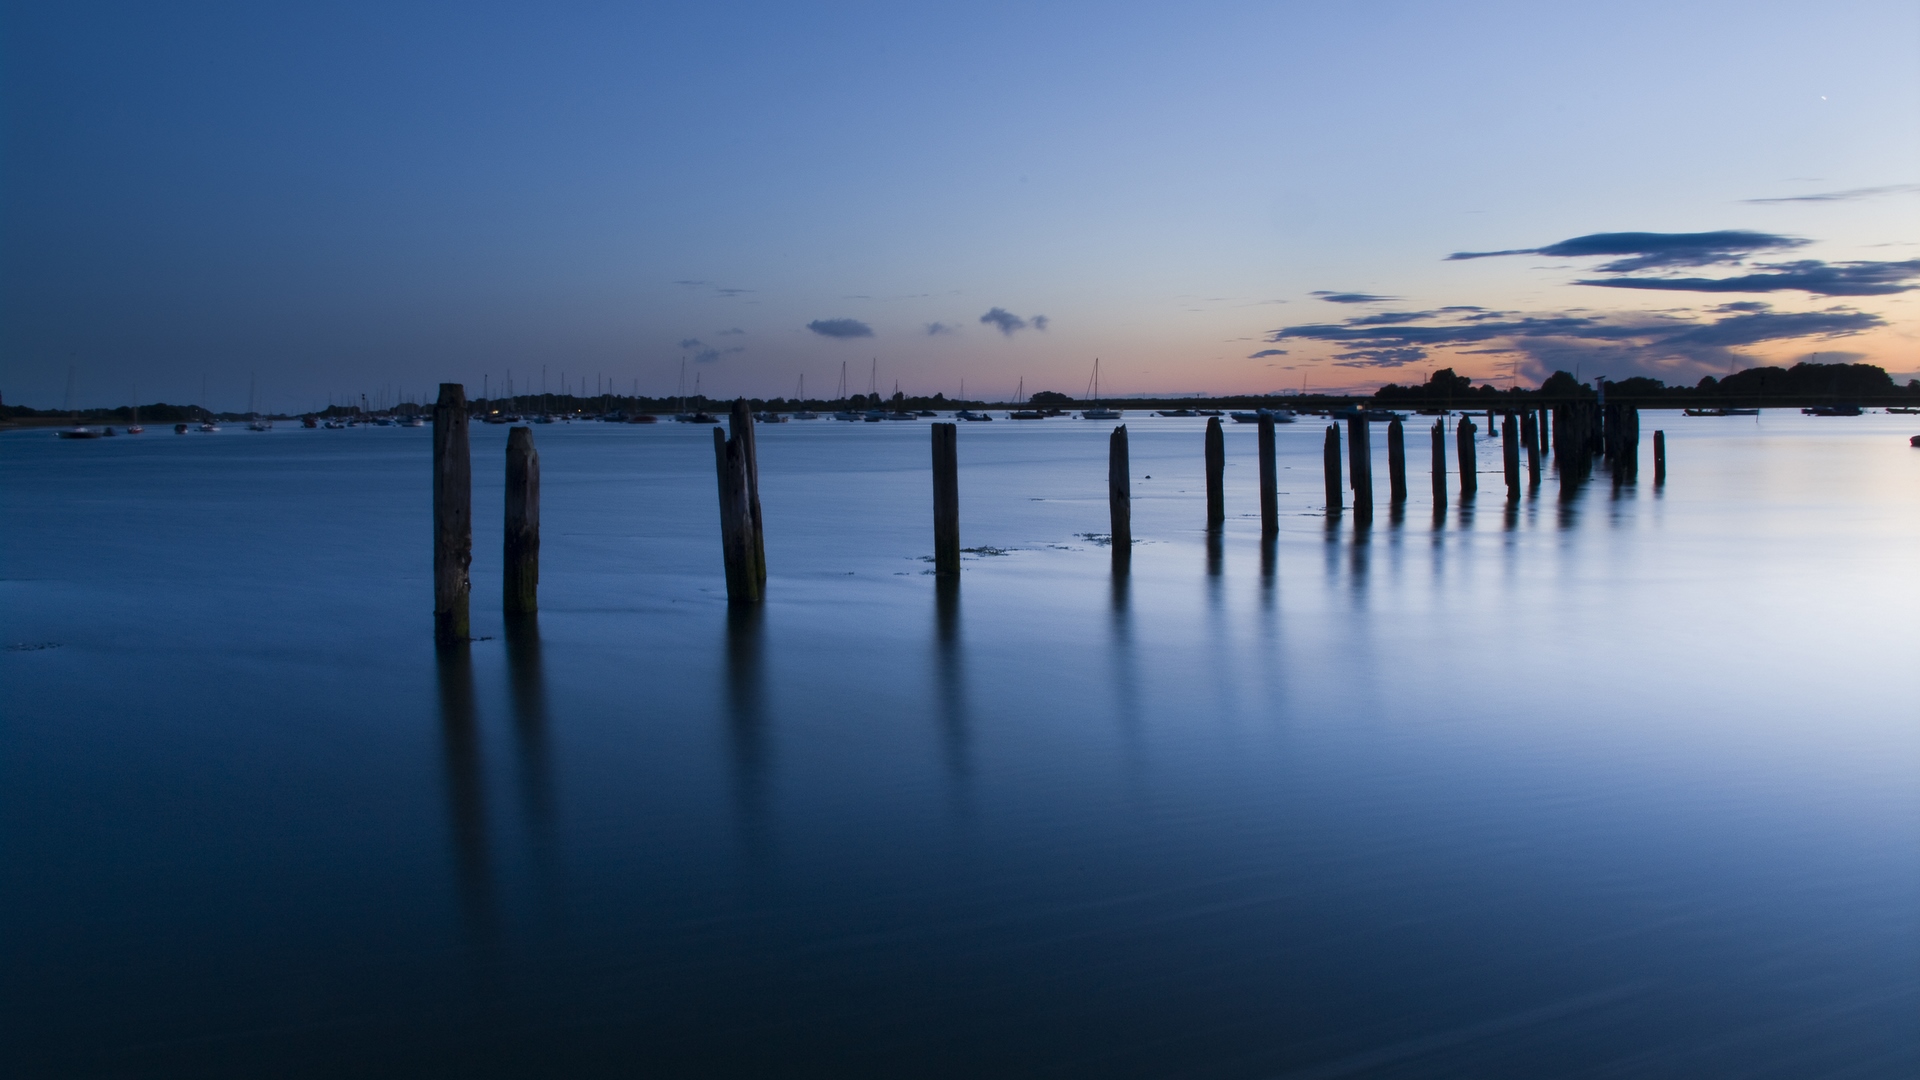 Wallpaper / calm, boats, harbour, clear, ocean, pylons, sky, night free download